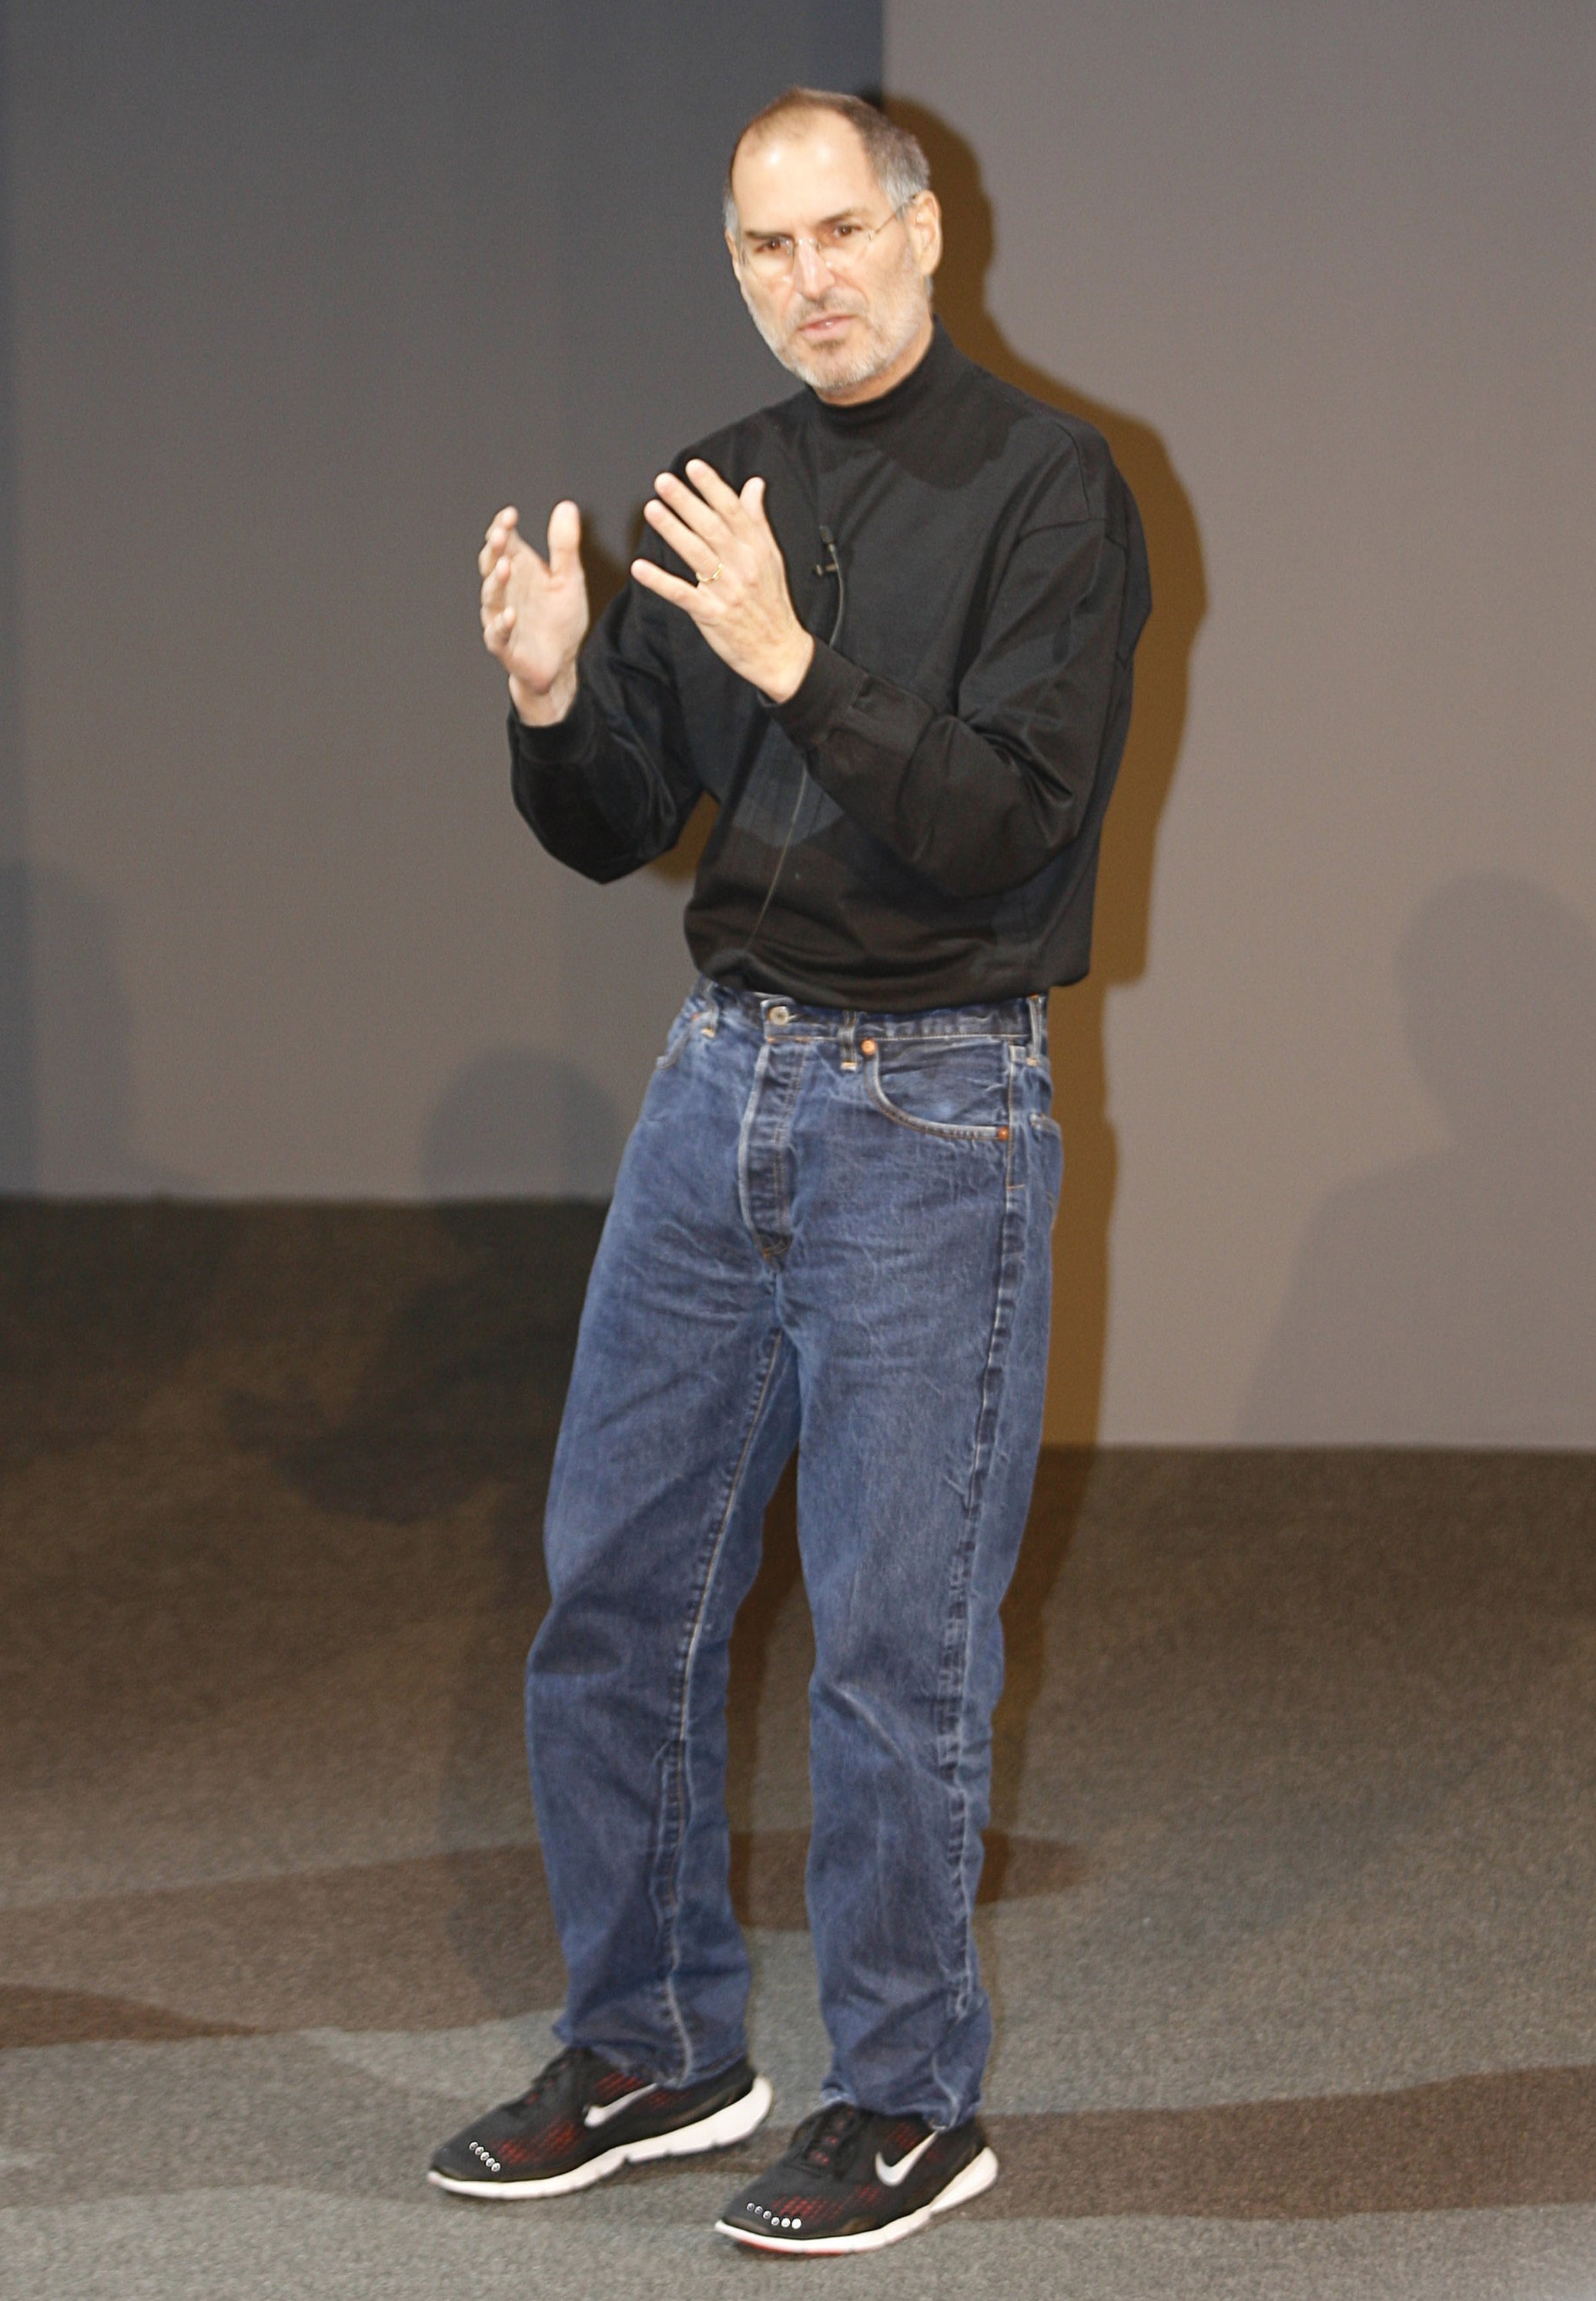 Steve Jobs wearing a black turtleneck sweater, blue jeans and sports shoes at Apple events